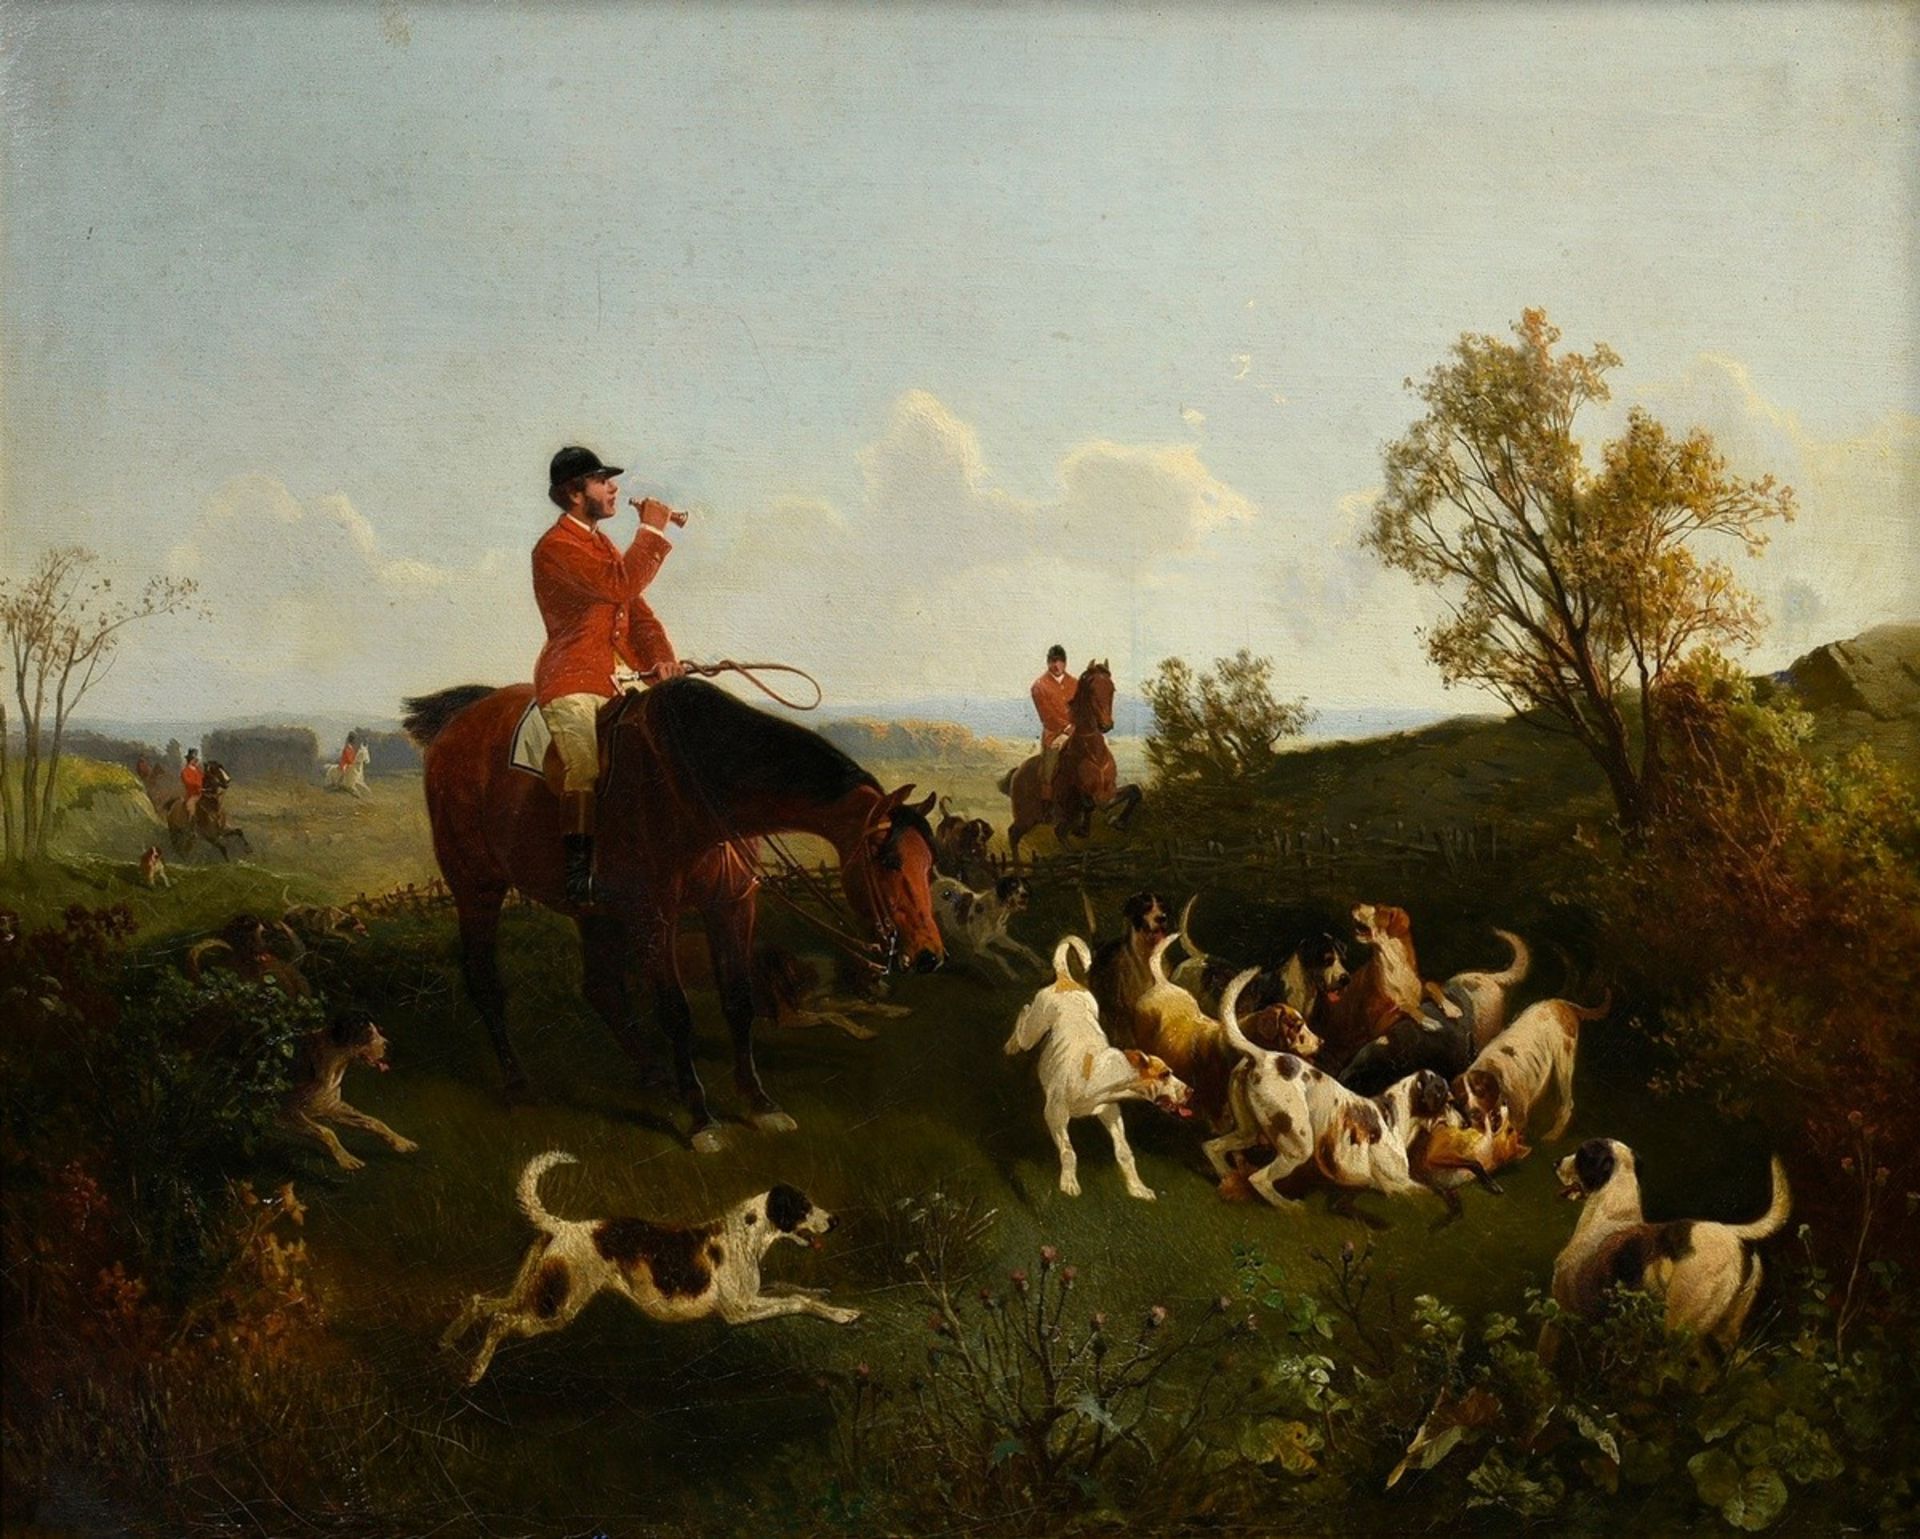 Unknown artist of the late 19th c. "Par force hunt rider and pack with fox", oil/canvas, 53,5x68,5c